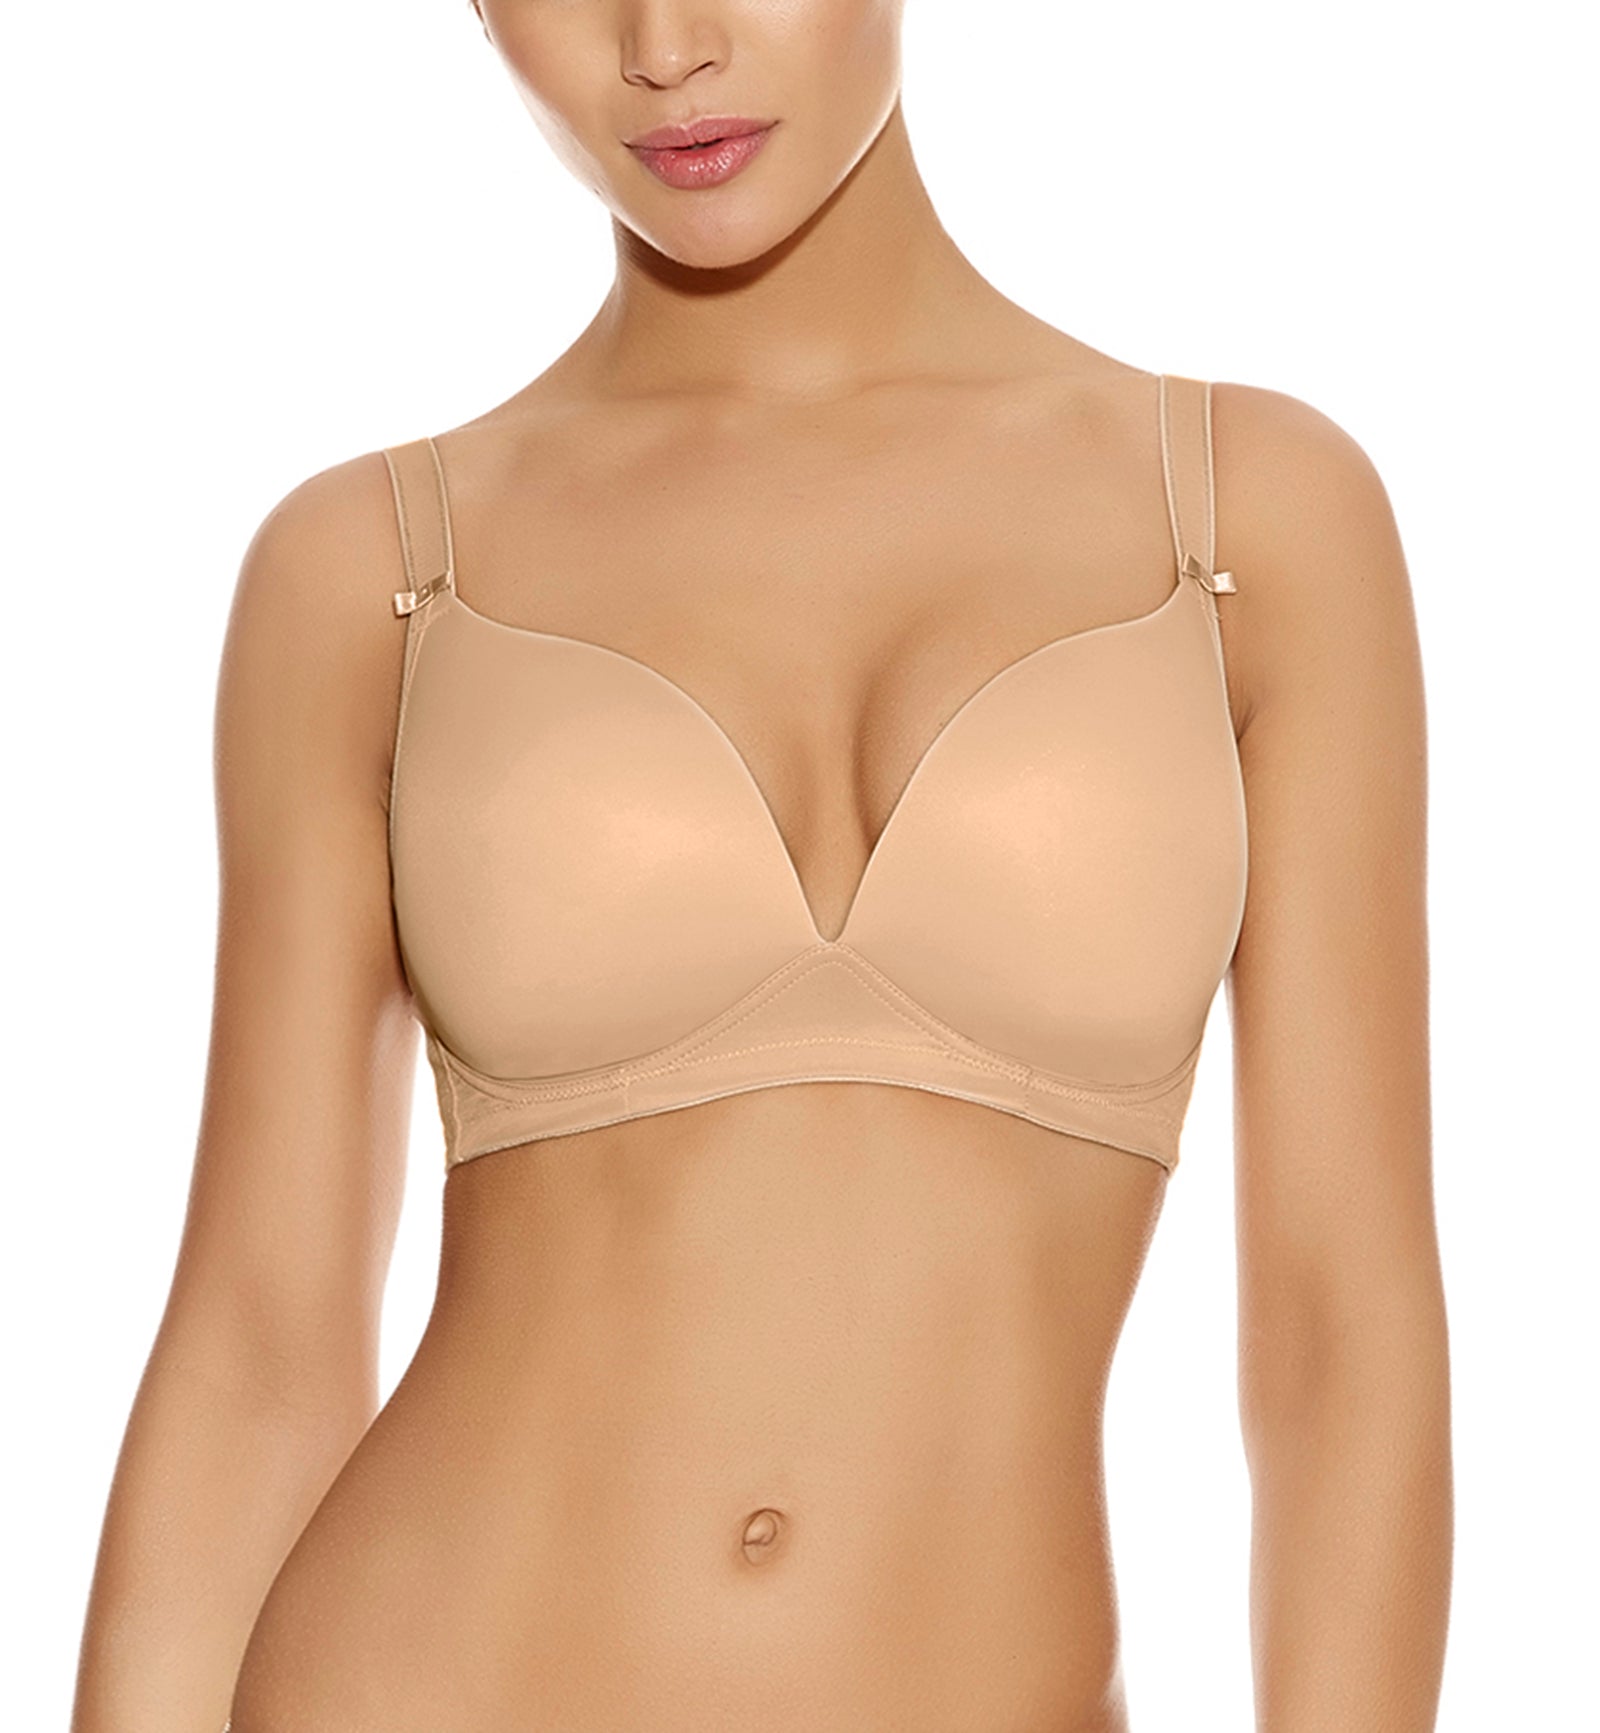 Freya Deco Padded Plunge Softcup (4231),32E,Nude - Nude,32E